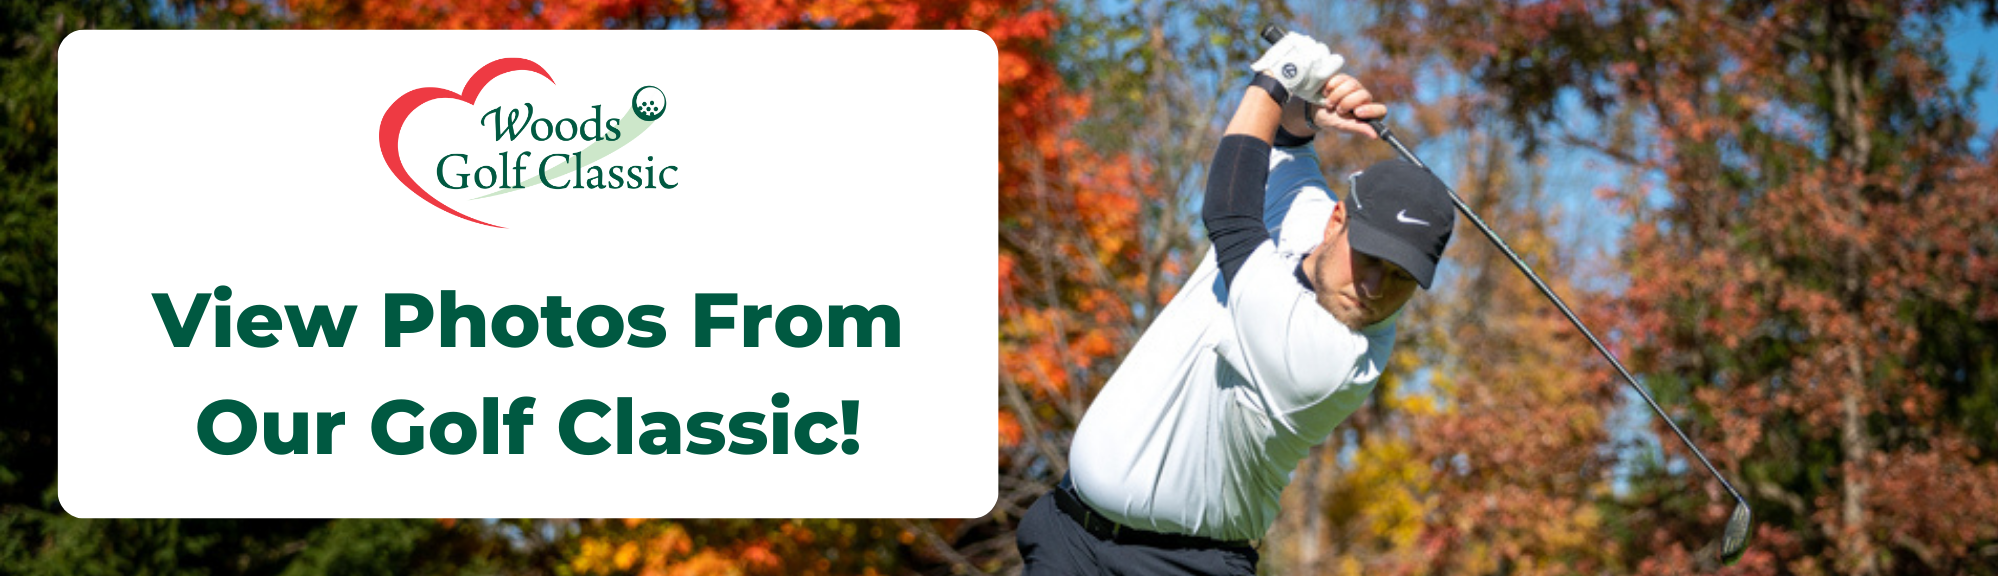 A graphic reads "Woods Golf Classic: View Photos From Our Golf Classic!" with a background of a golfer swinging a driver in front of autumn trees at Union League Liberty Hill on Oct. 18.